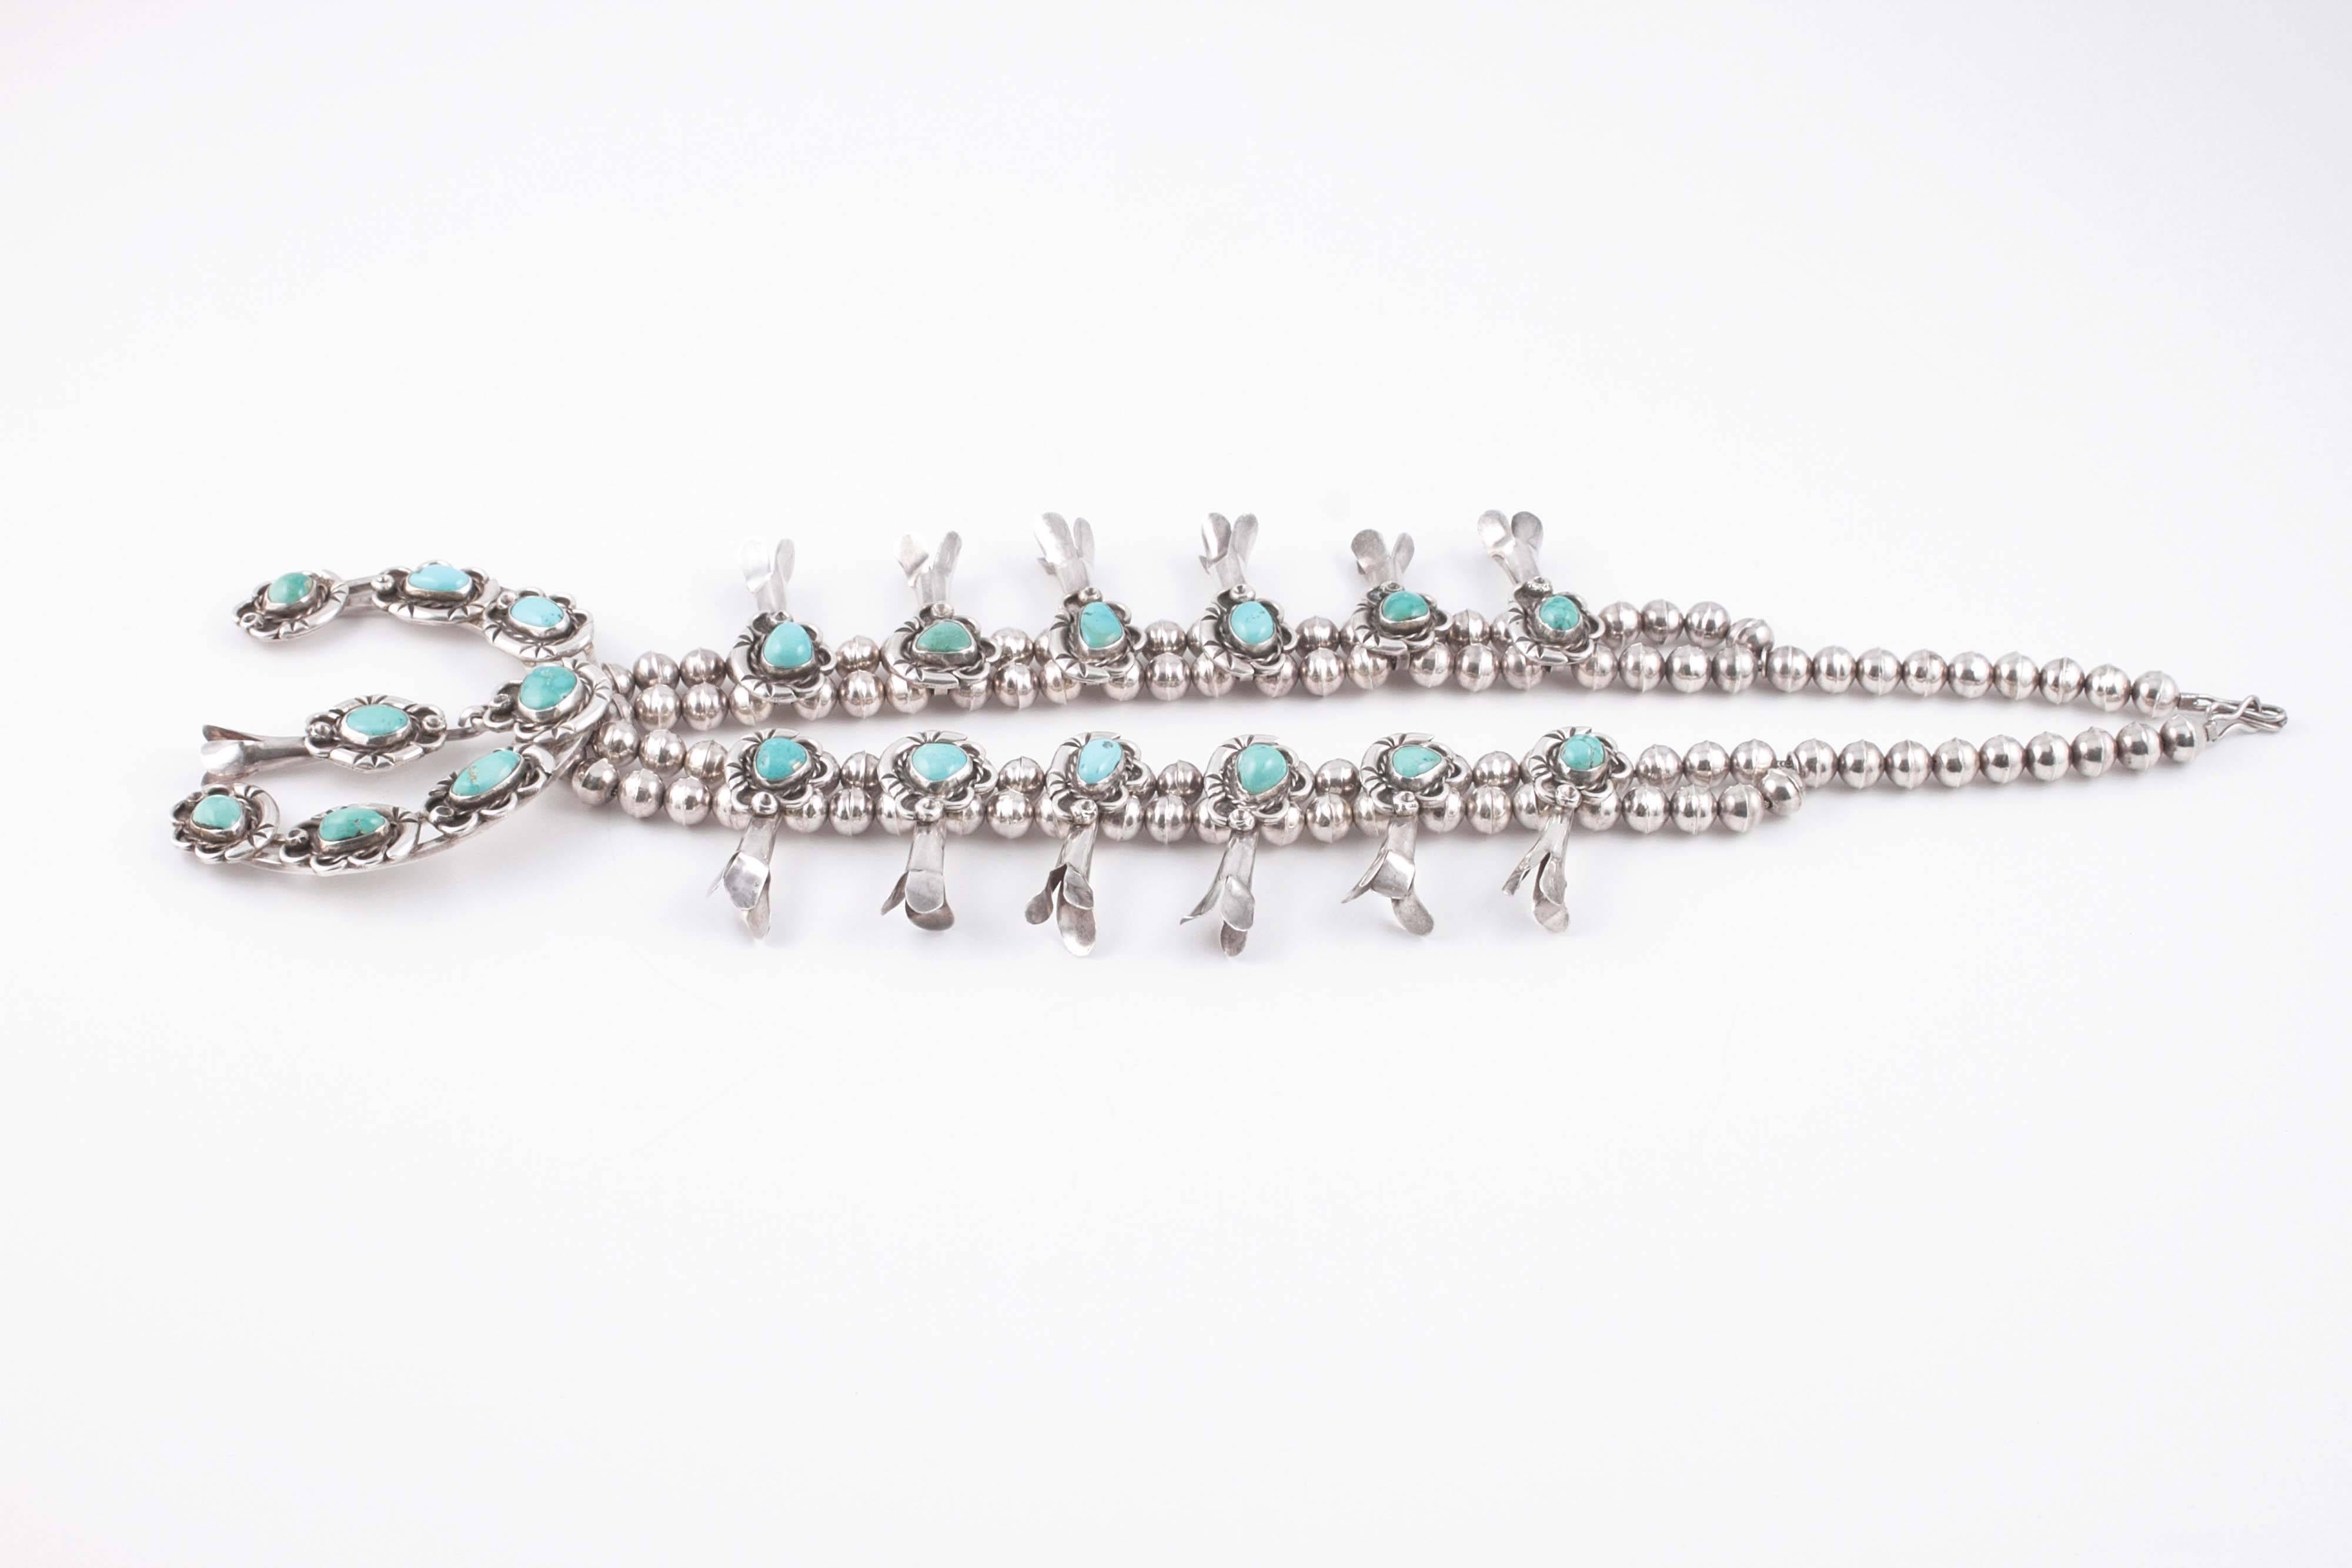 Silver Squash Blossom turquoise necklace 4